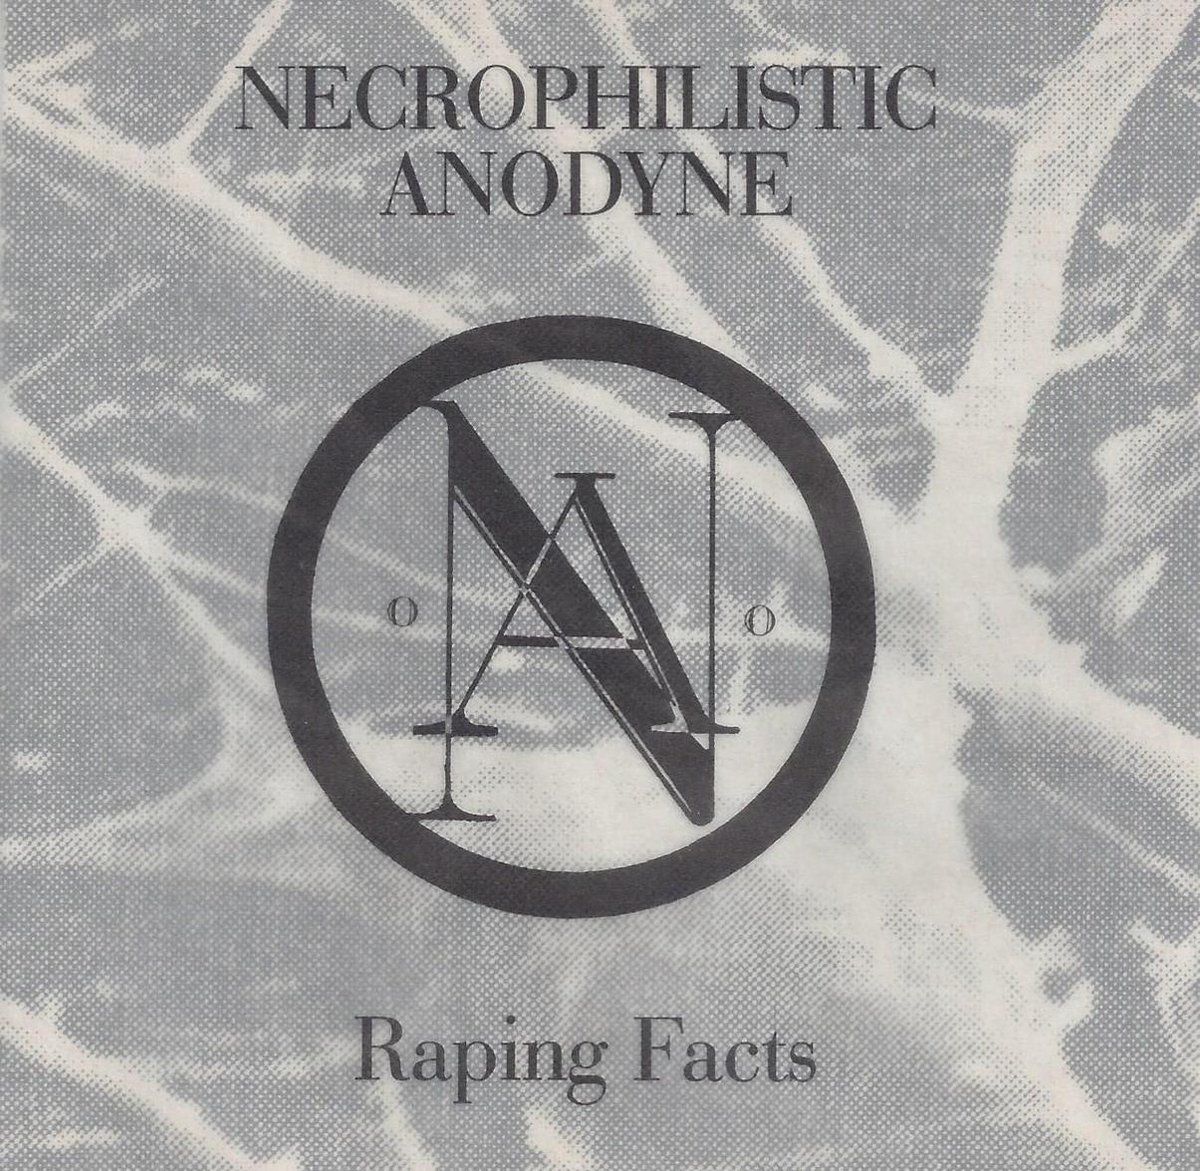 Raping Facts - Necrophilistic Anodyne